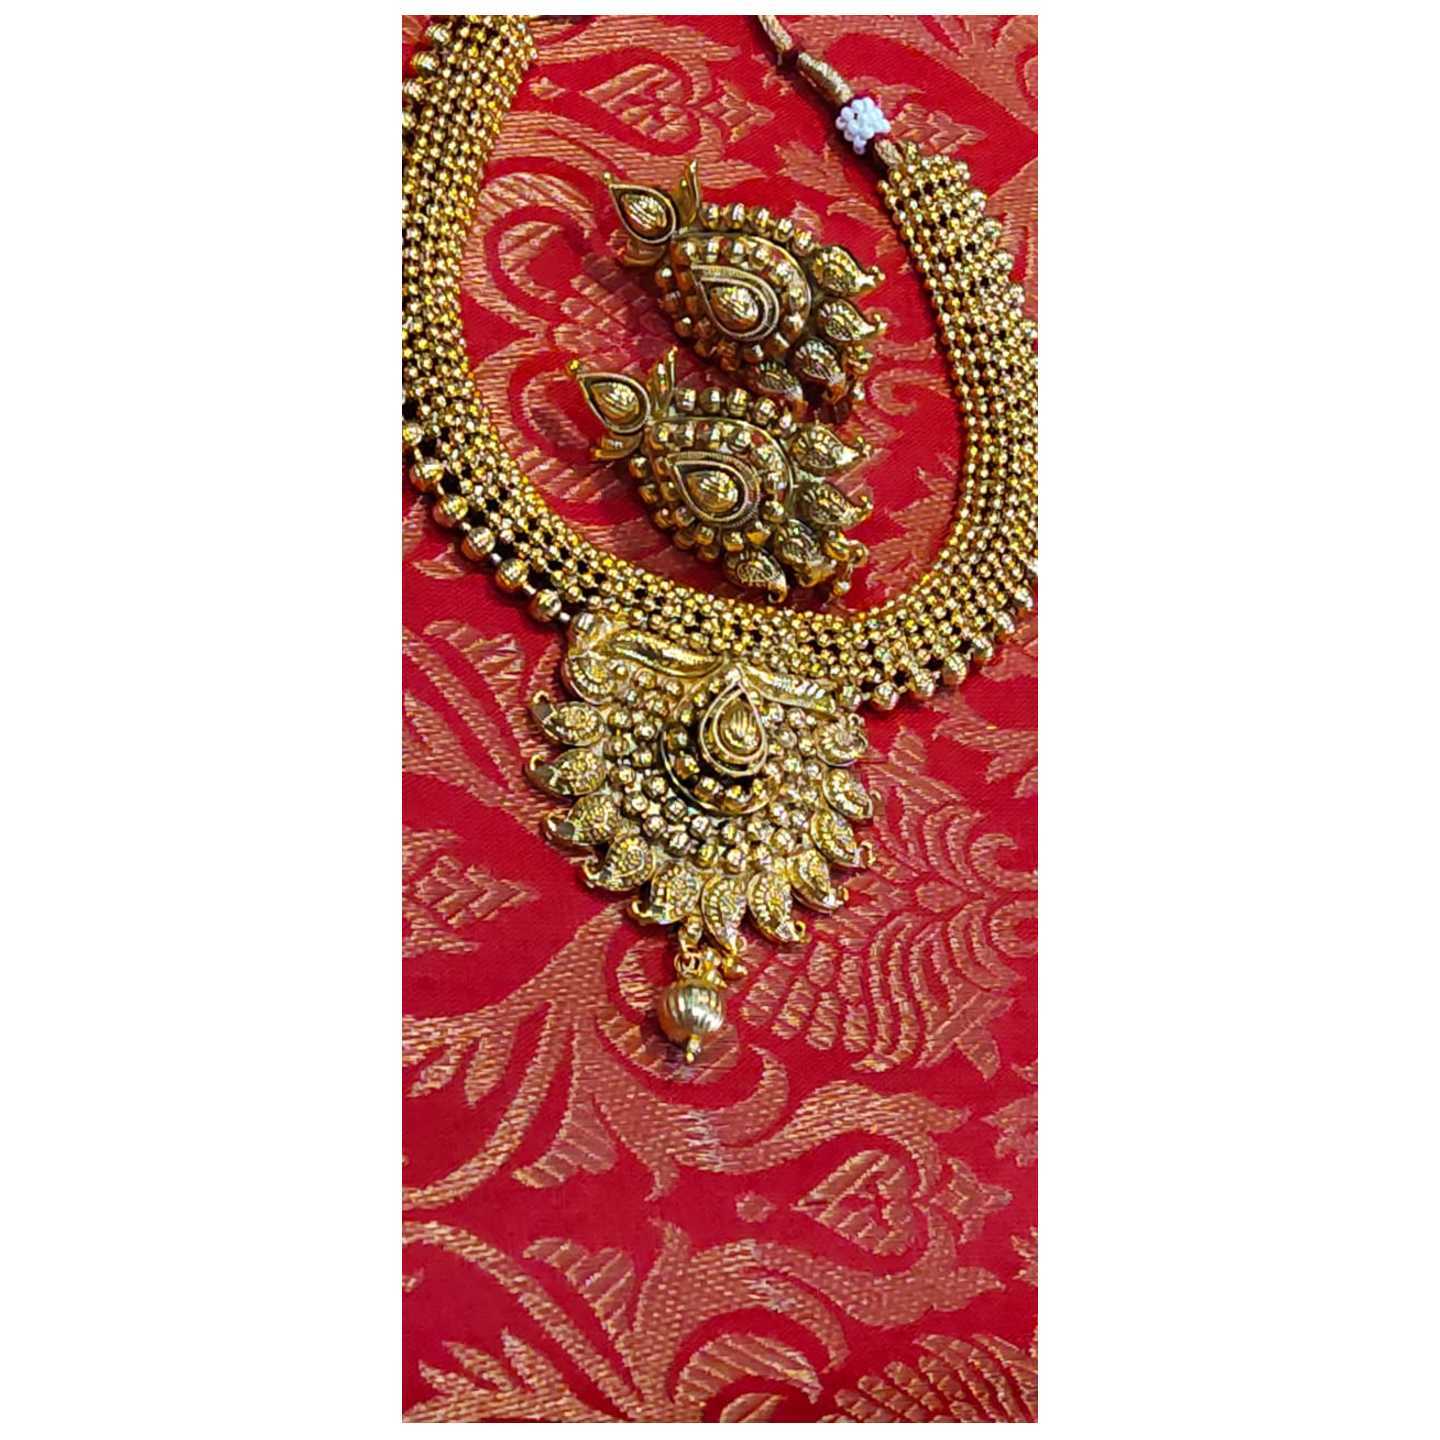 Gold Plated Short  Necklace with Earrings - 13 cms in length